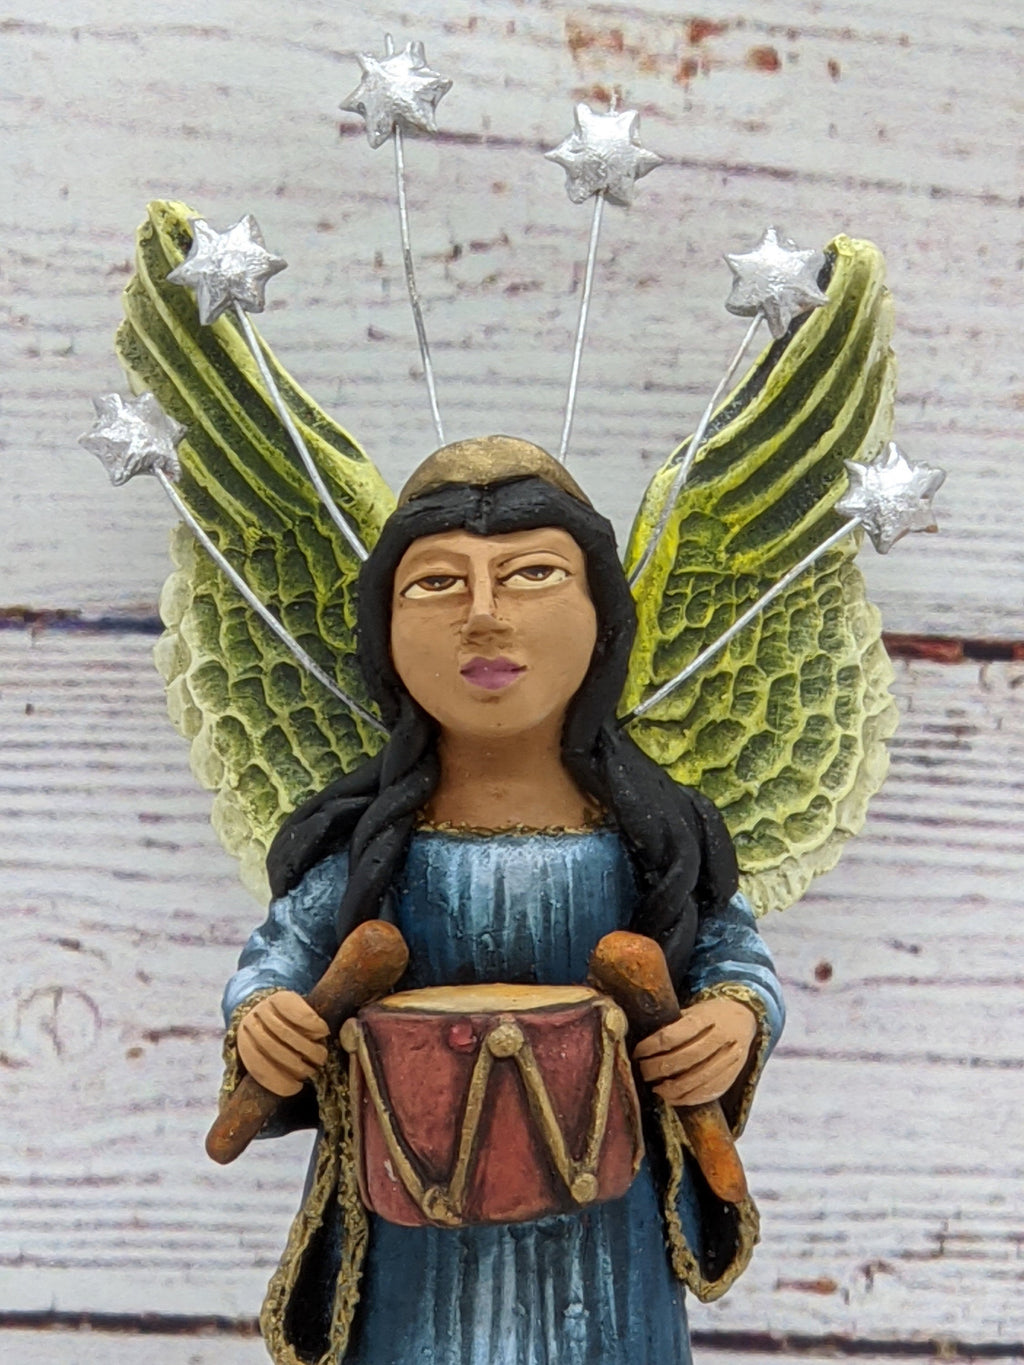 Angel with Drums,  Angel Home Decor, Handmade Angel Art from Oaxaca Mexico, Original Sculpture, Christmas Decoration